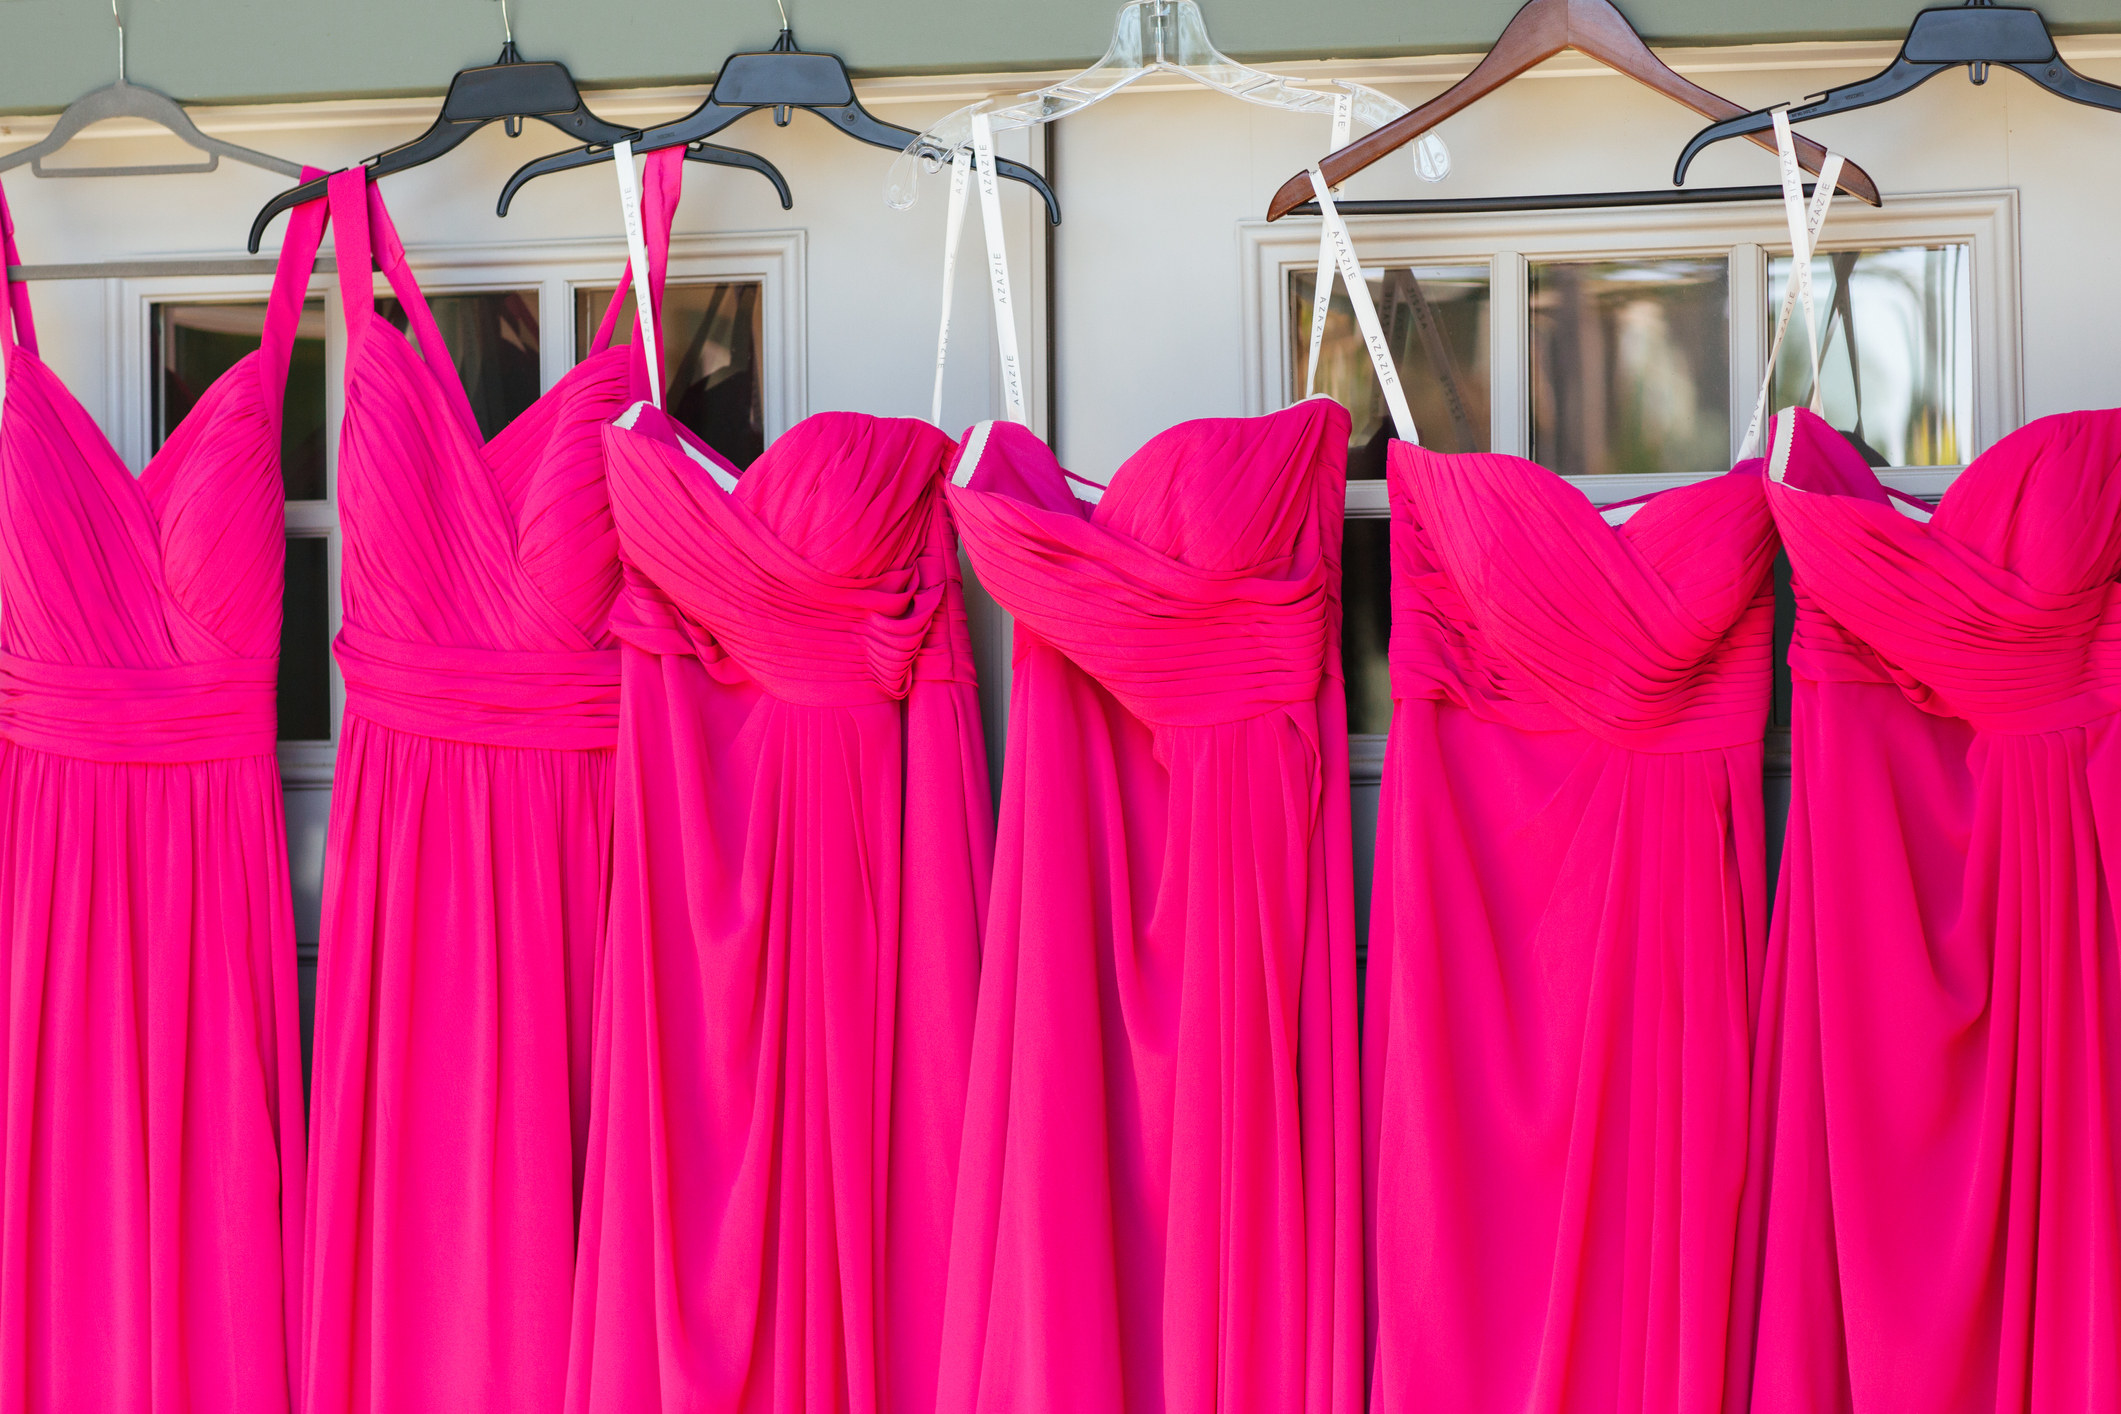 bridesmaids dresses hanging up in line